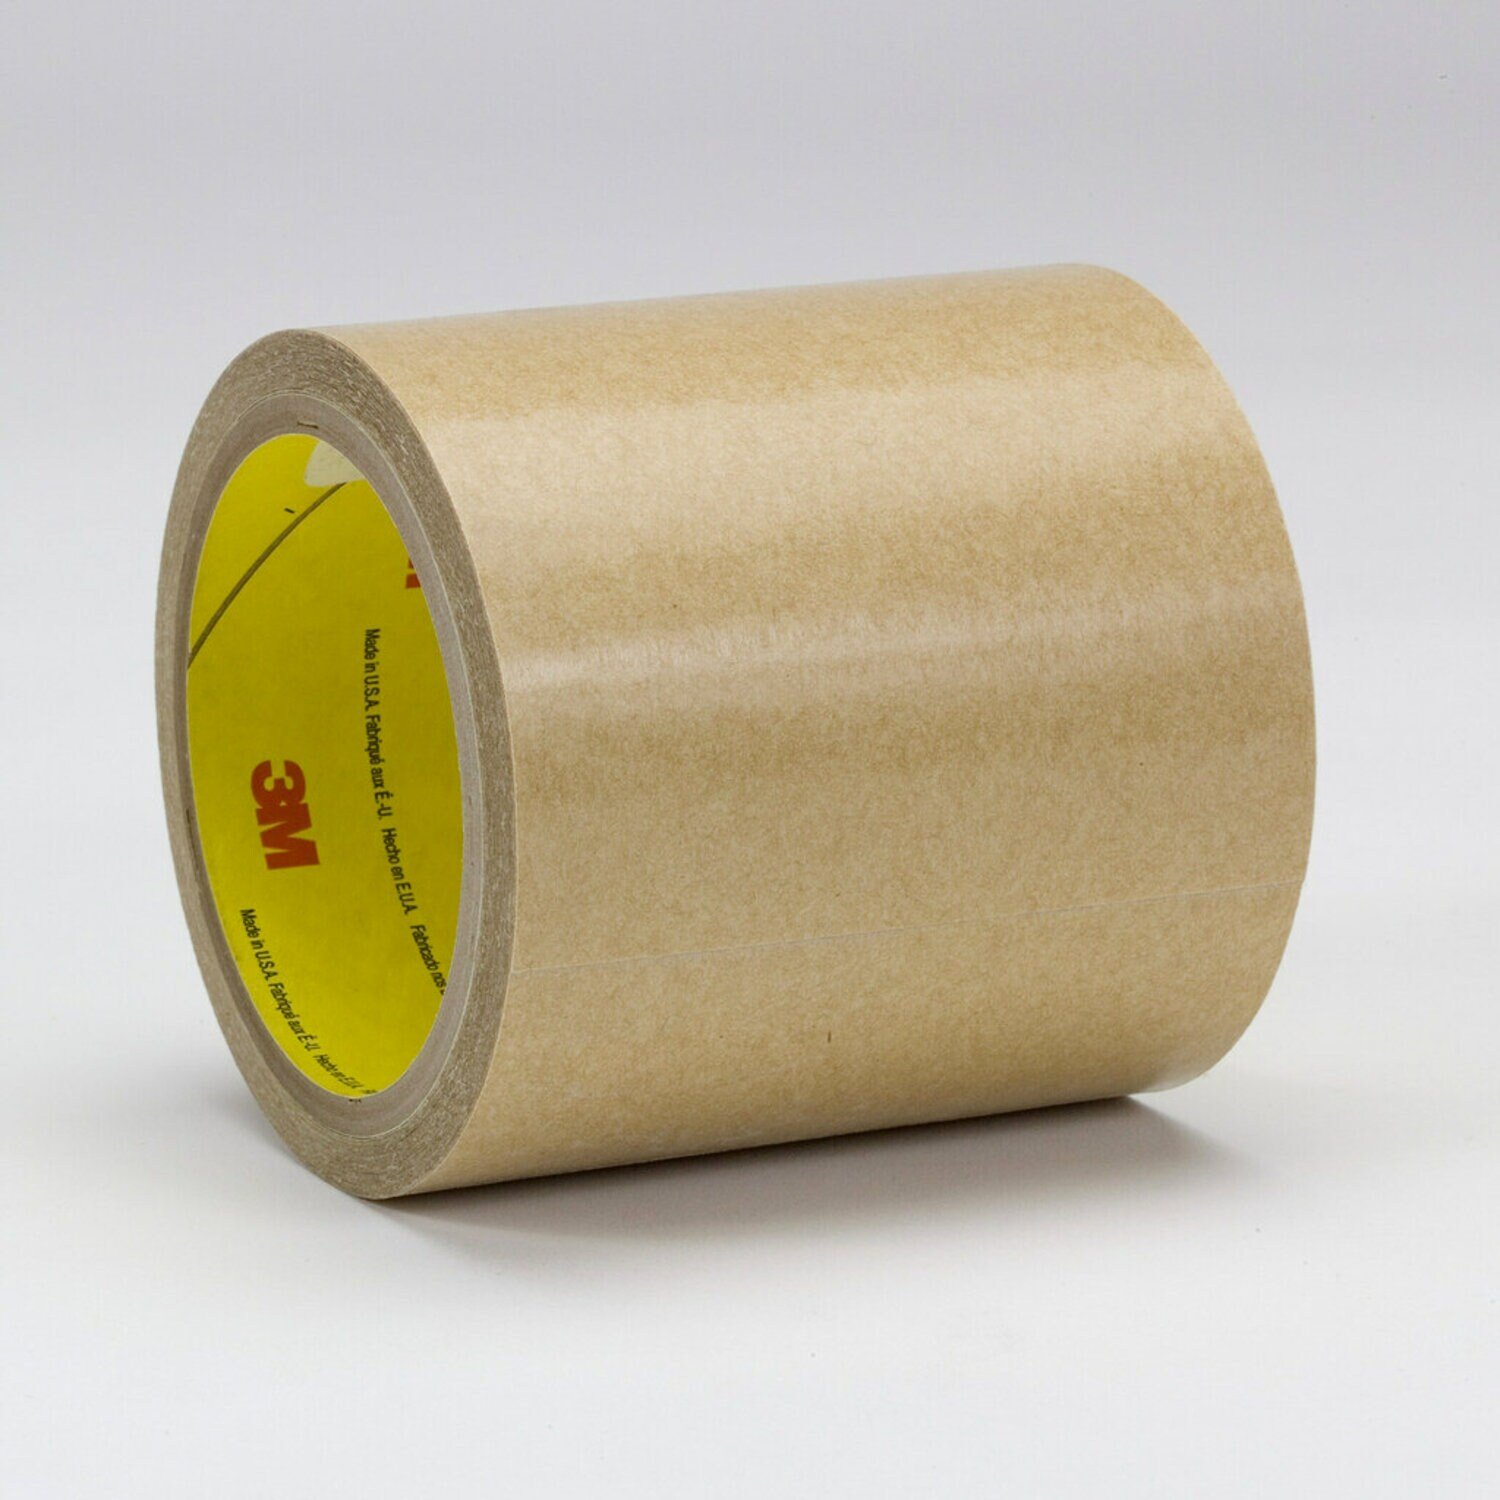 7010312368 - 3M Adhesive Transfer Tape 950, Clear, 0.25 in x 60 yd, 5 Mil, 144/Case